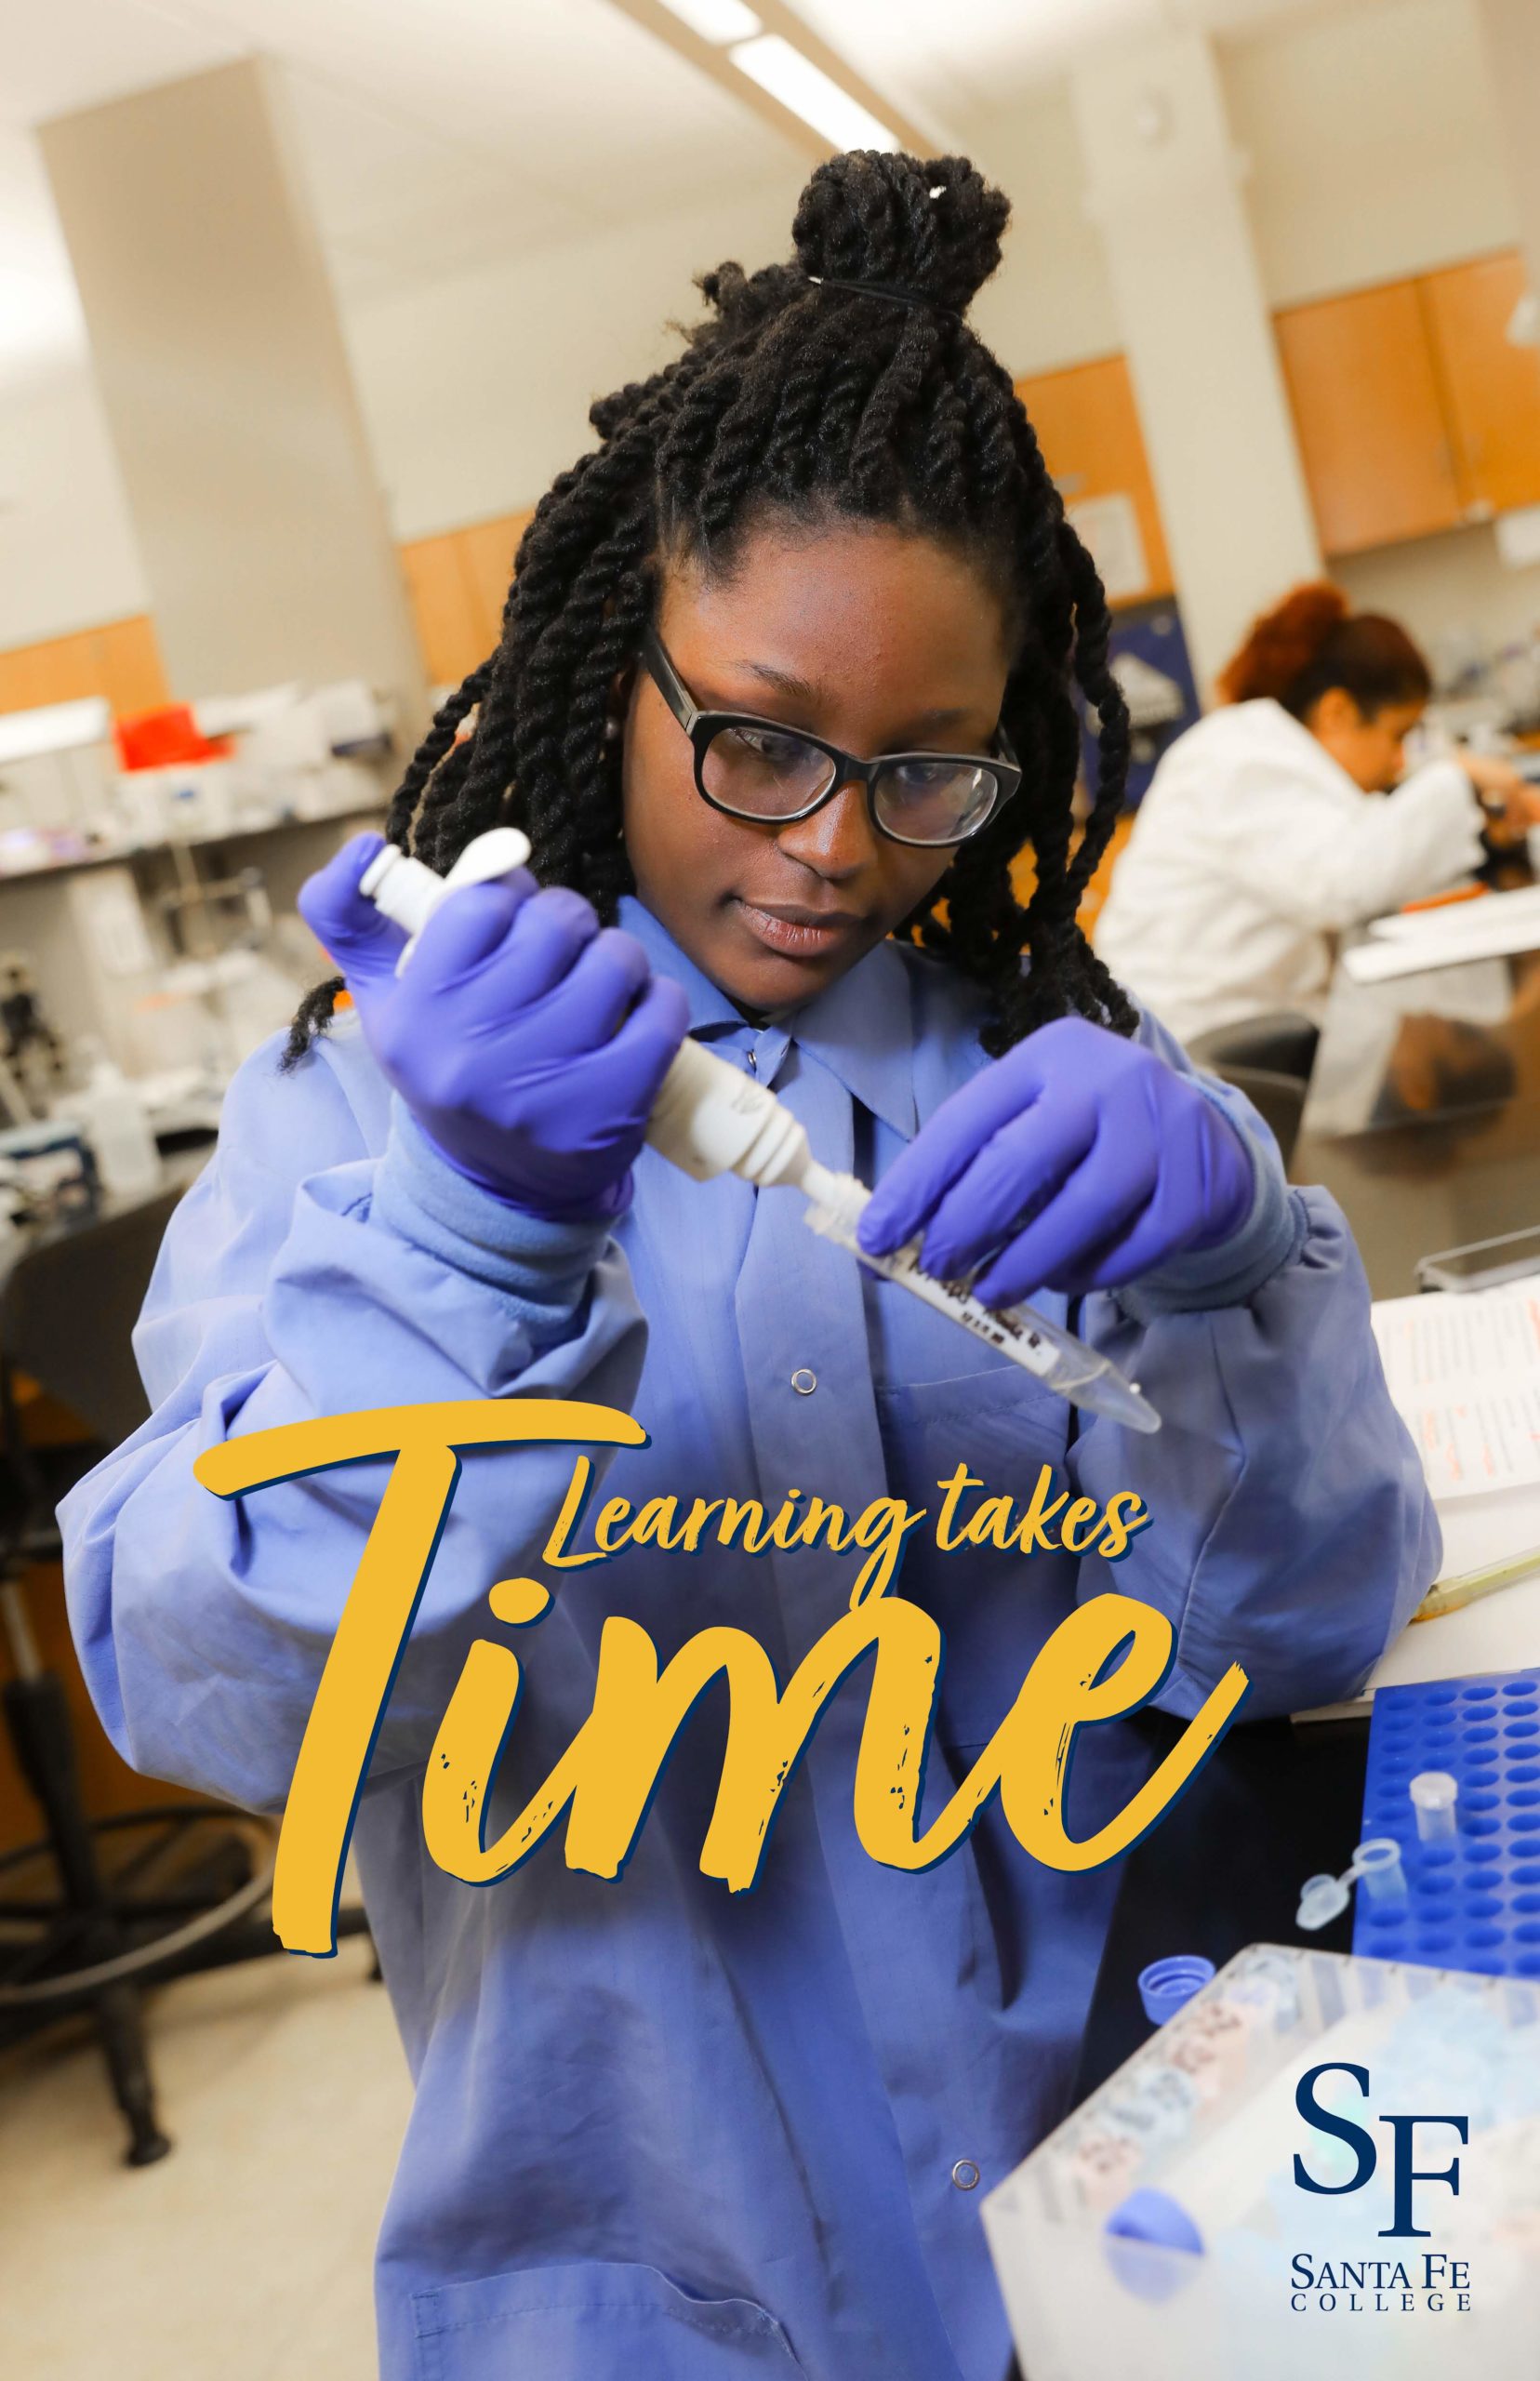 A young woman with black braids, dark hair, thick glasses and purple scrubs is gloved up and working in a chemistry lab.